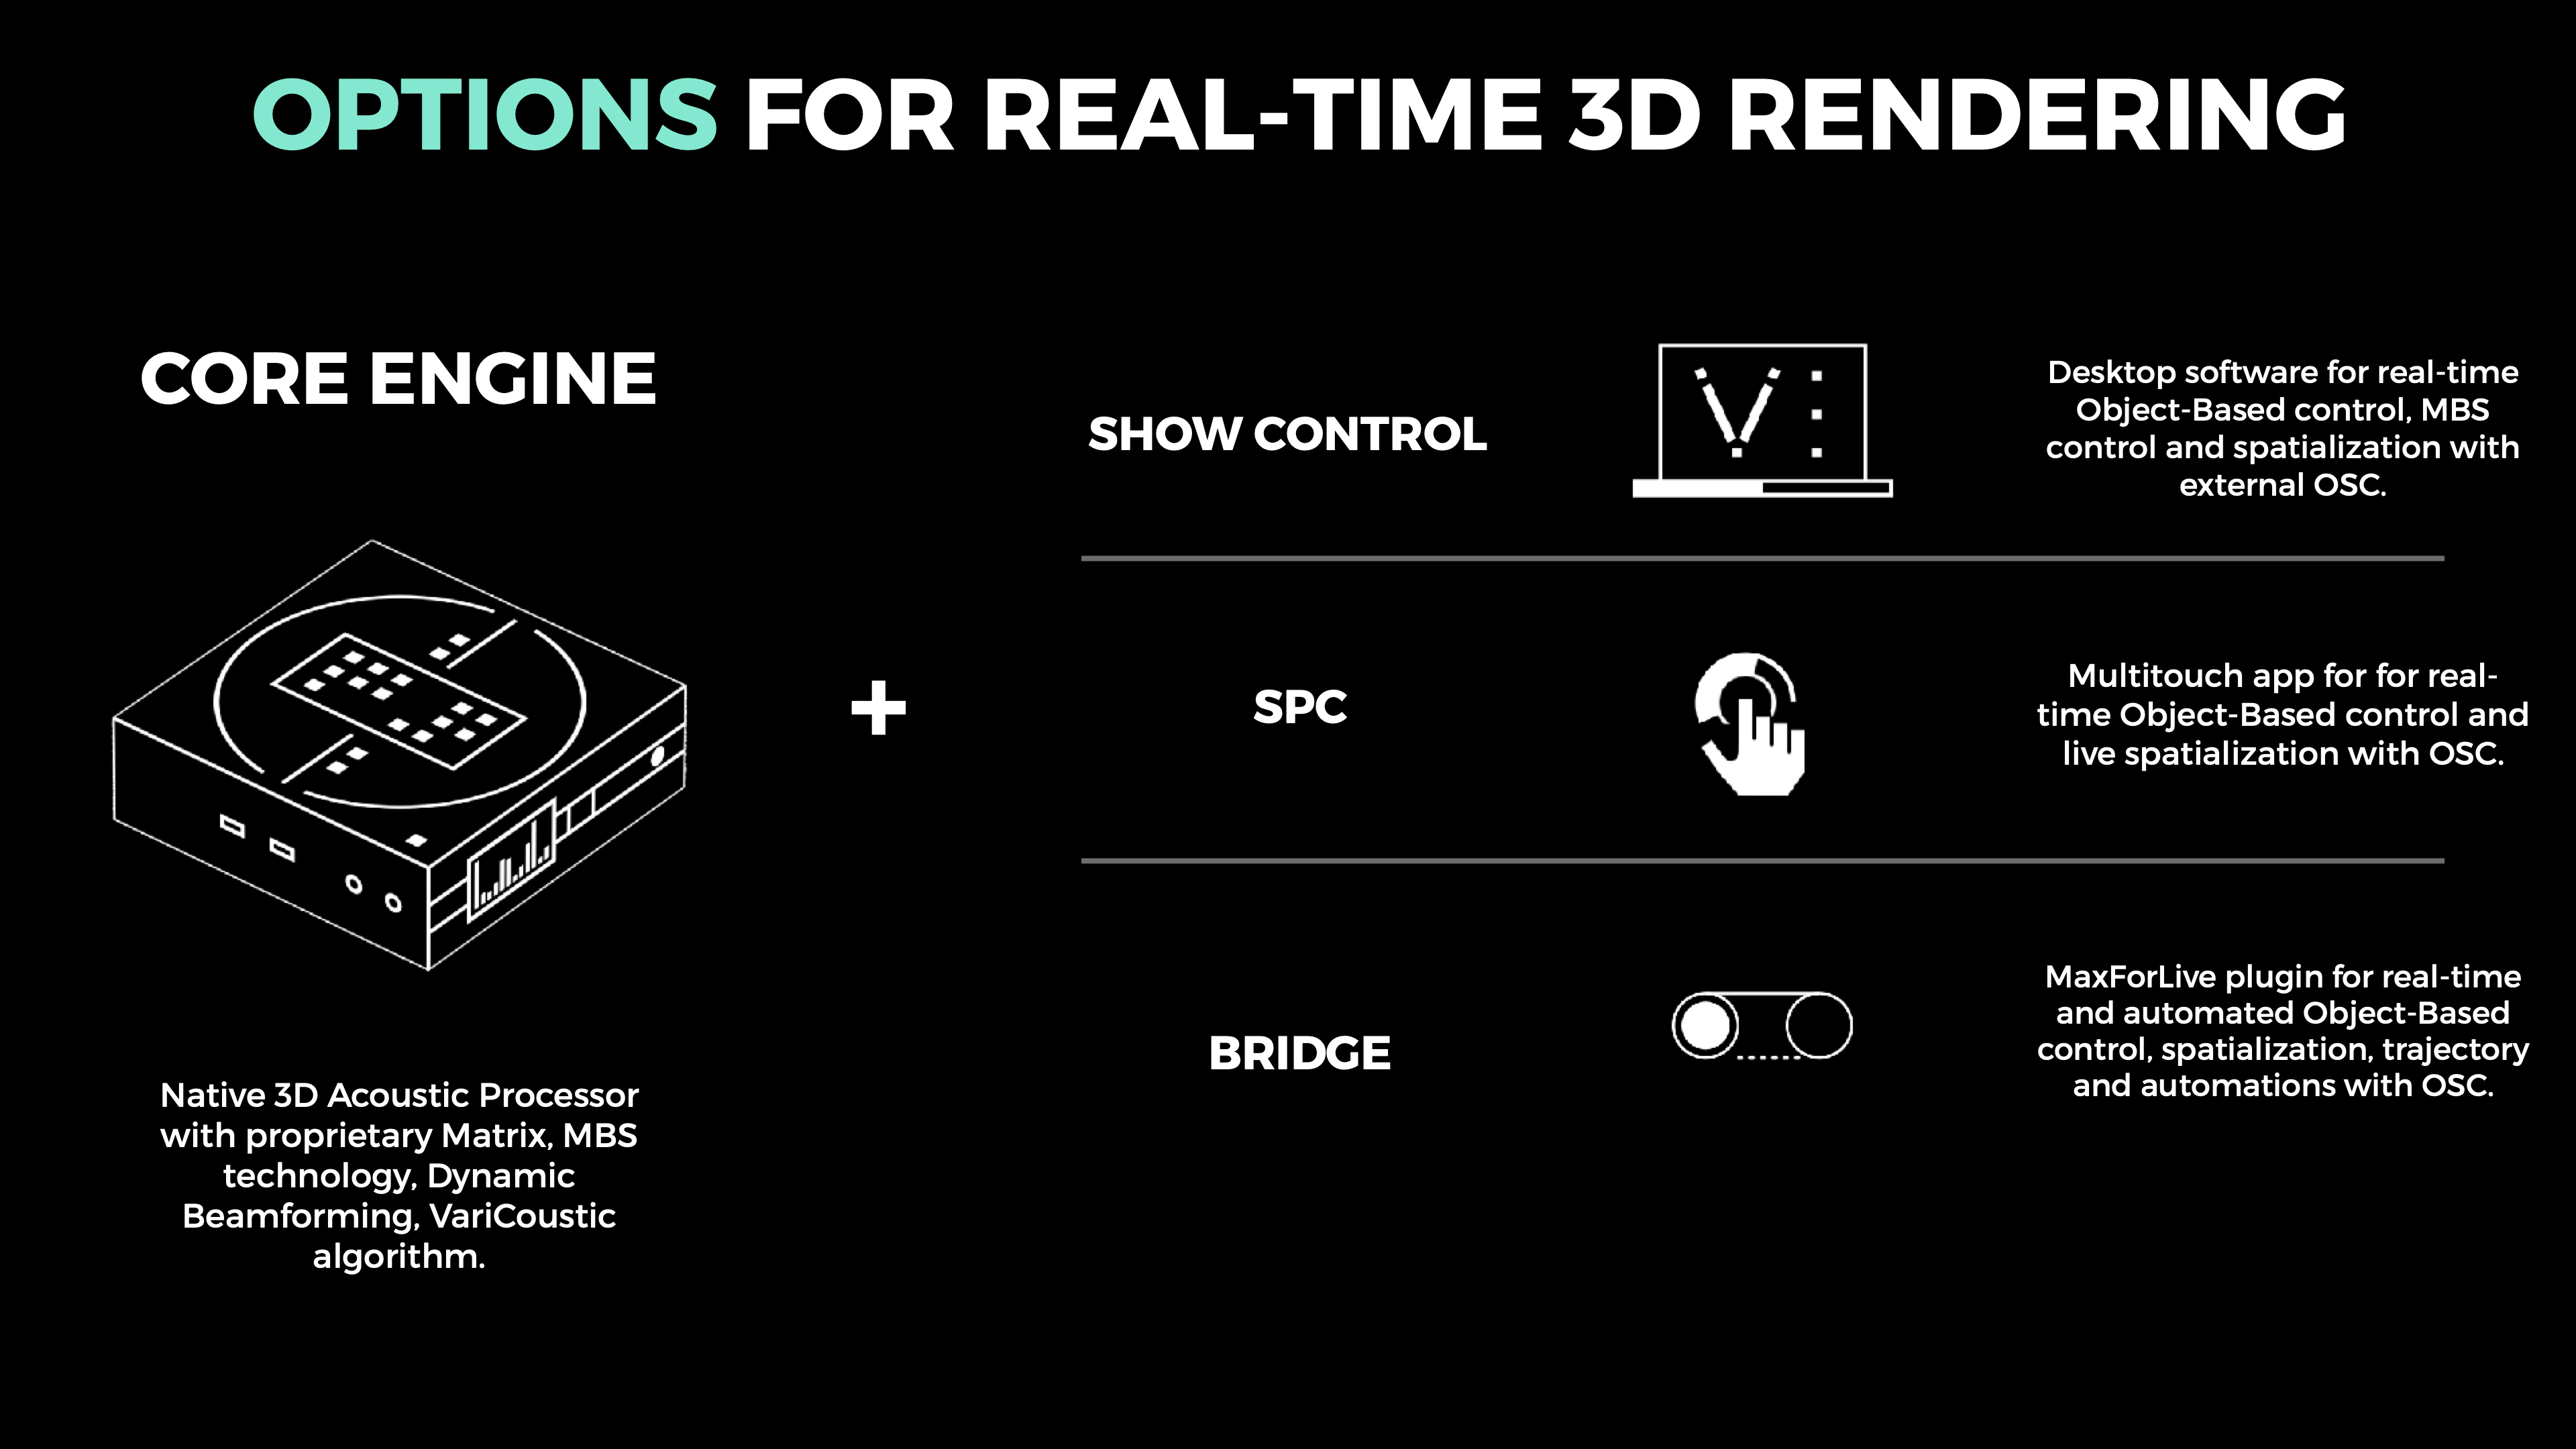 OPTIONS-FOR-REAL-TIME-3D-RENDERING